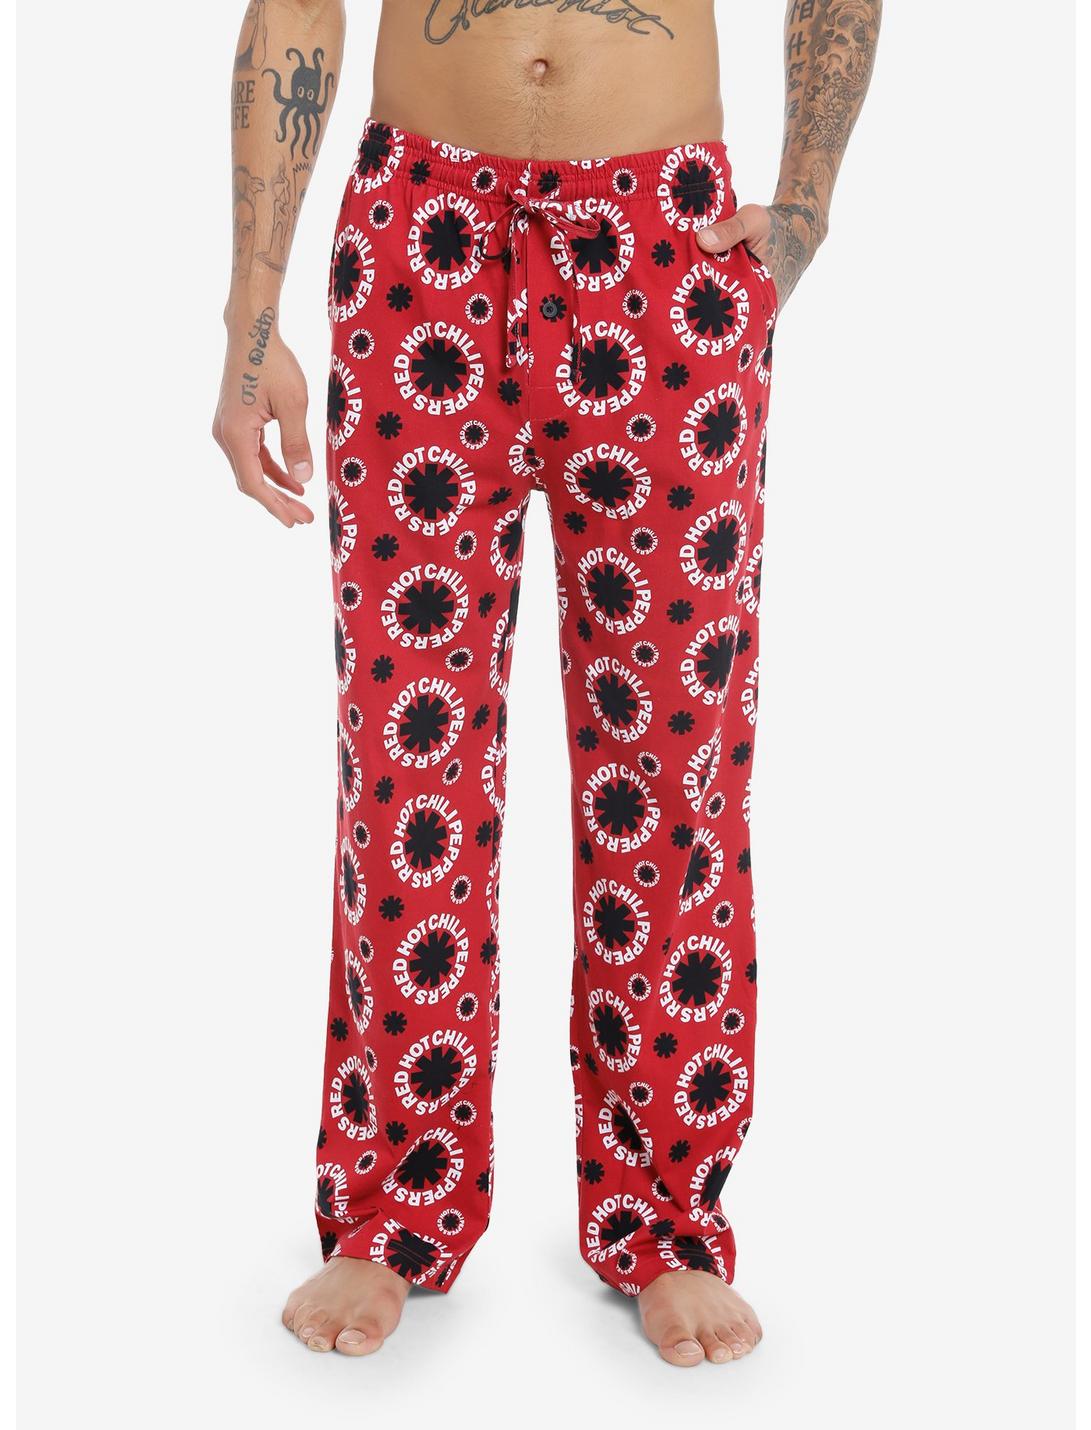 Red Hot Chili Peppers Logo Pajama Pants, RED, hi-res